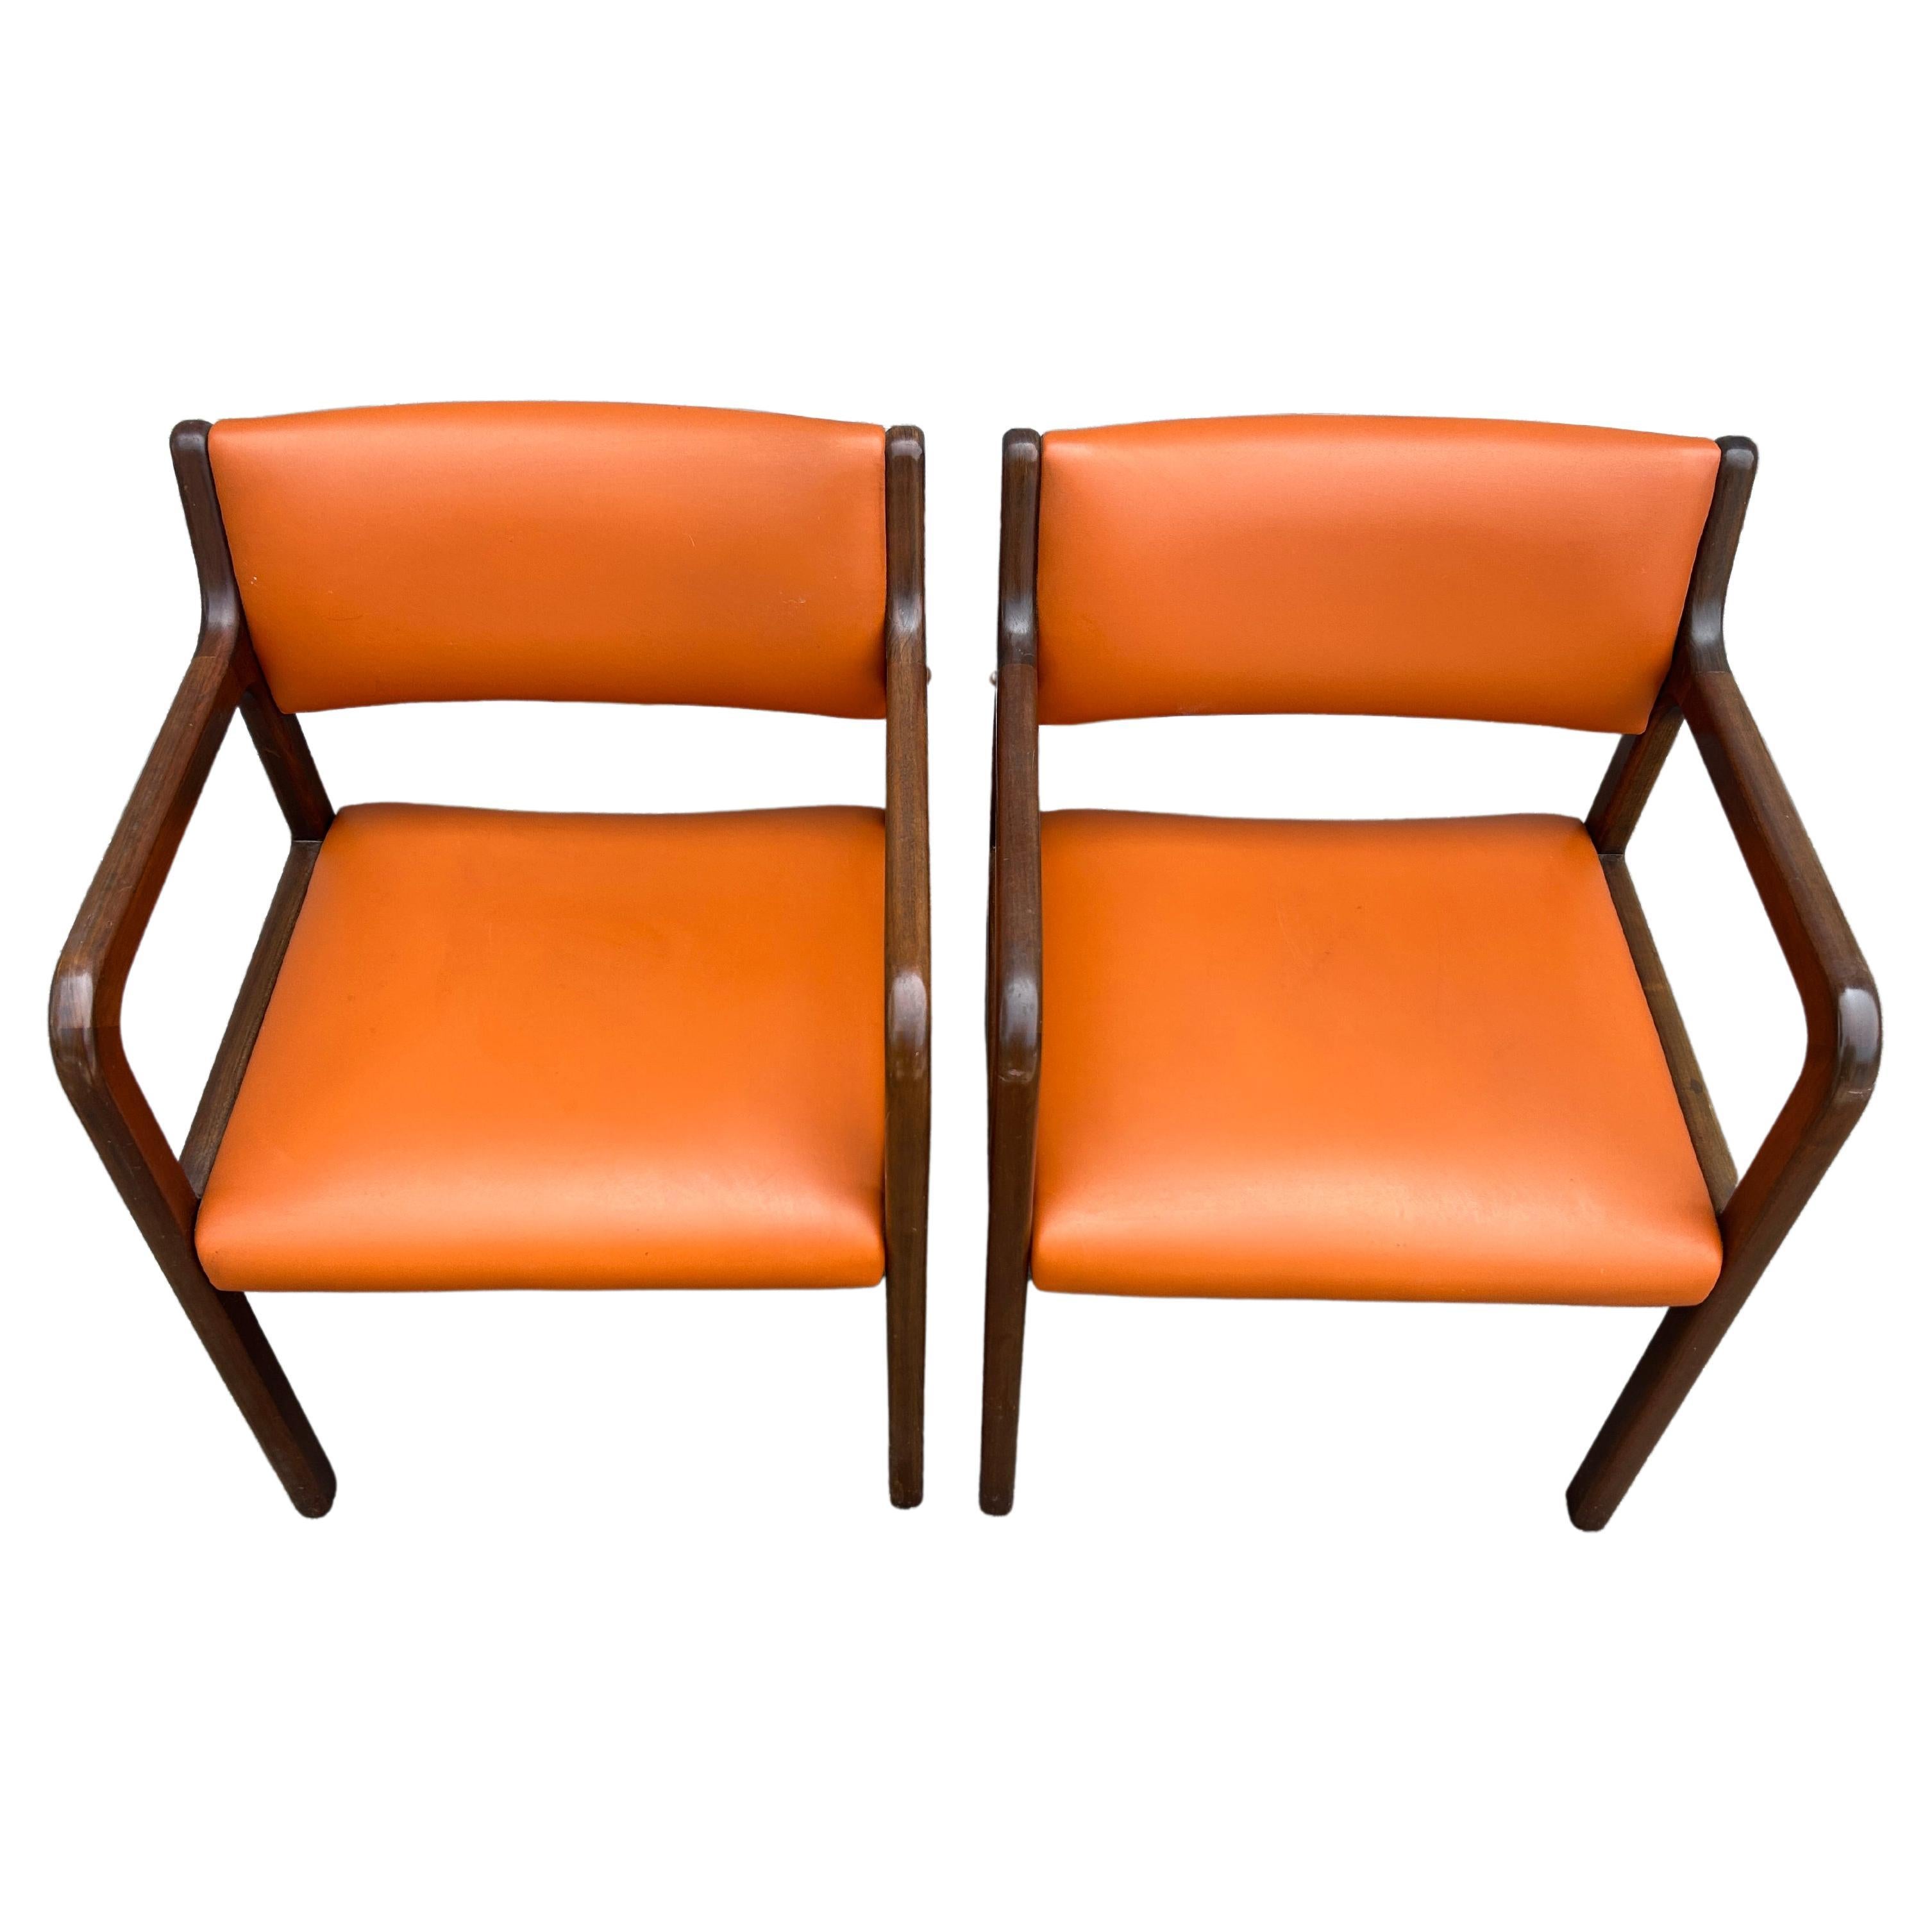 American Pair of Mid-Century Modern Rounded Walnut Arm Chairs with Orange Upholstery